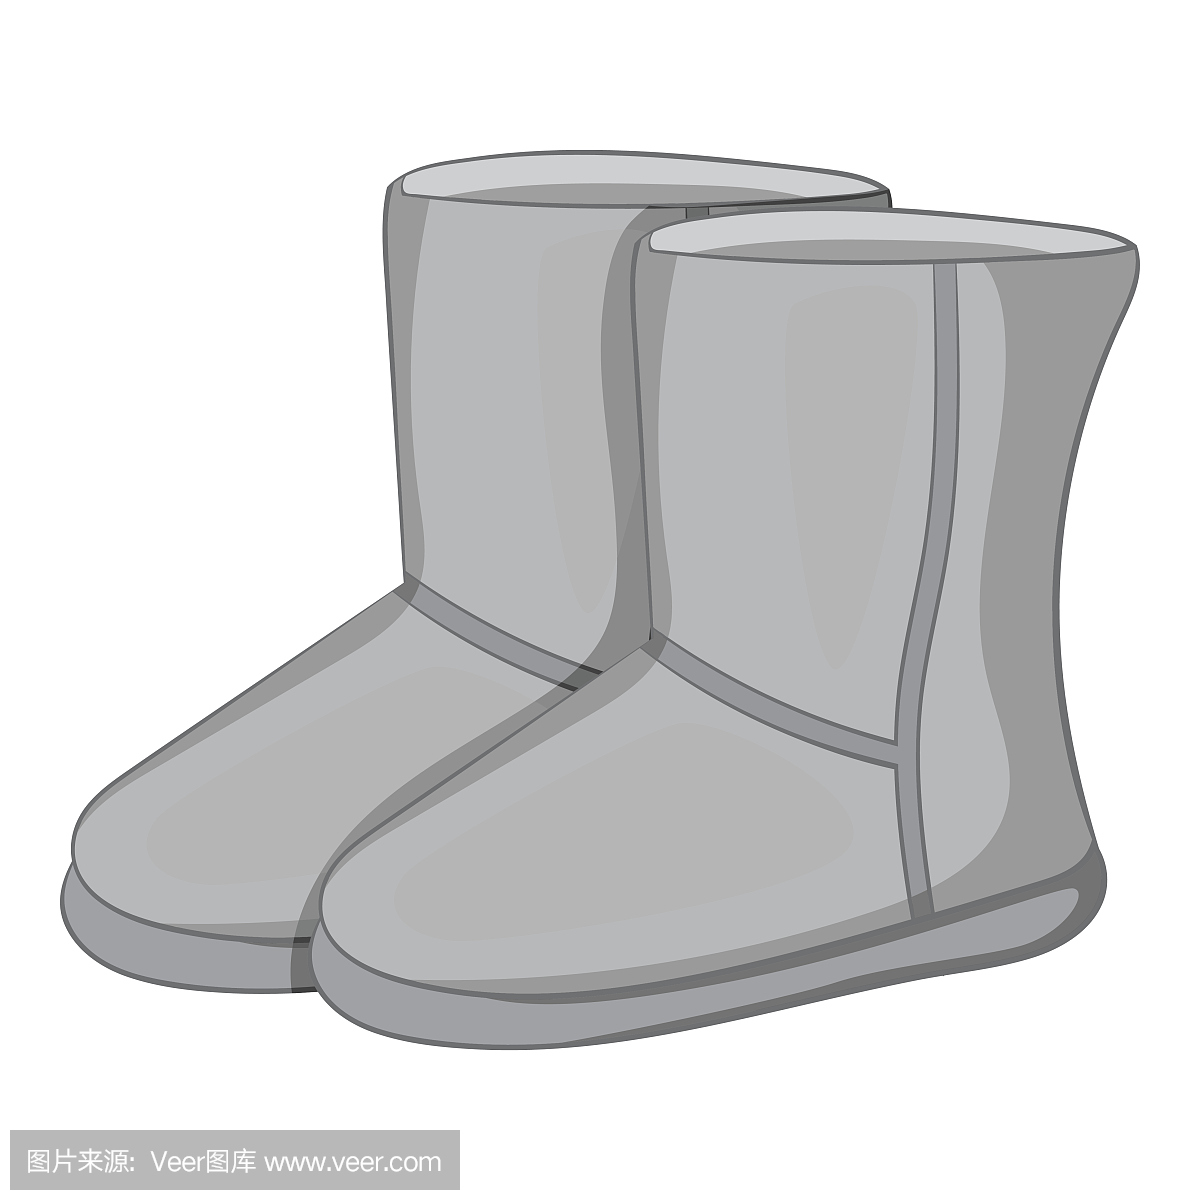 Winter ugg boots icon, gray monochrome style